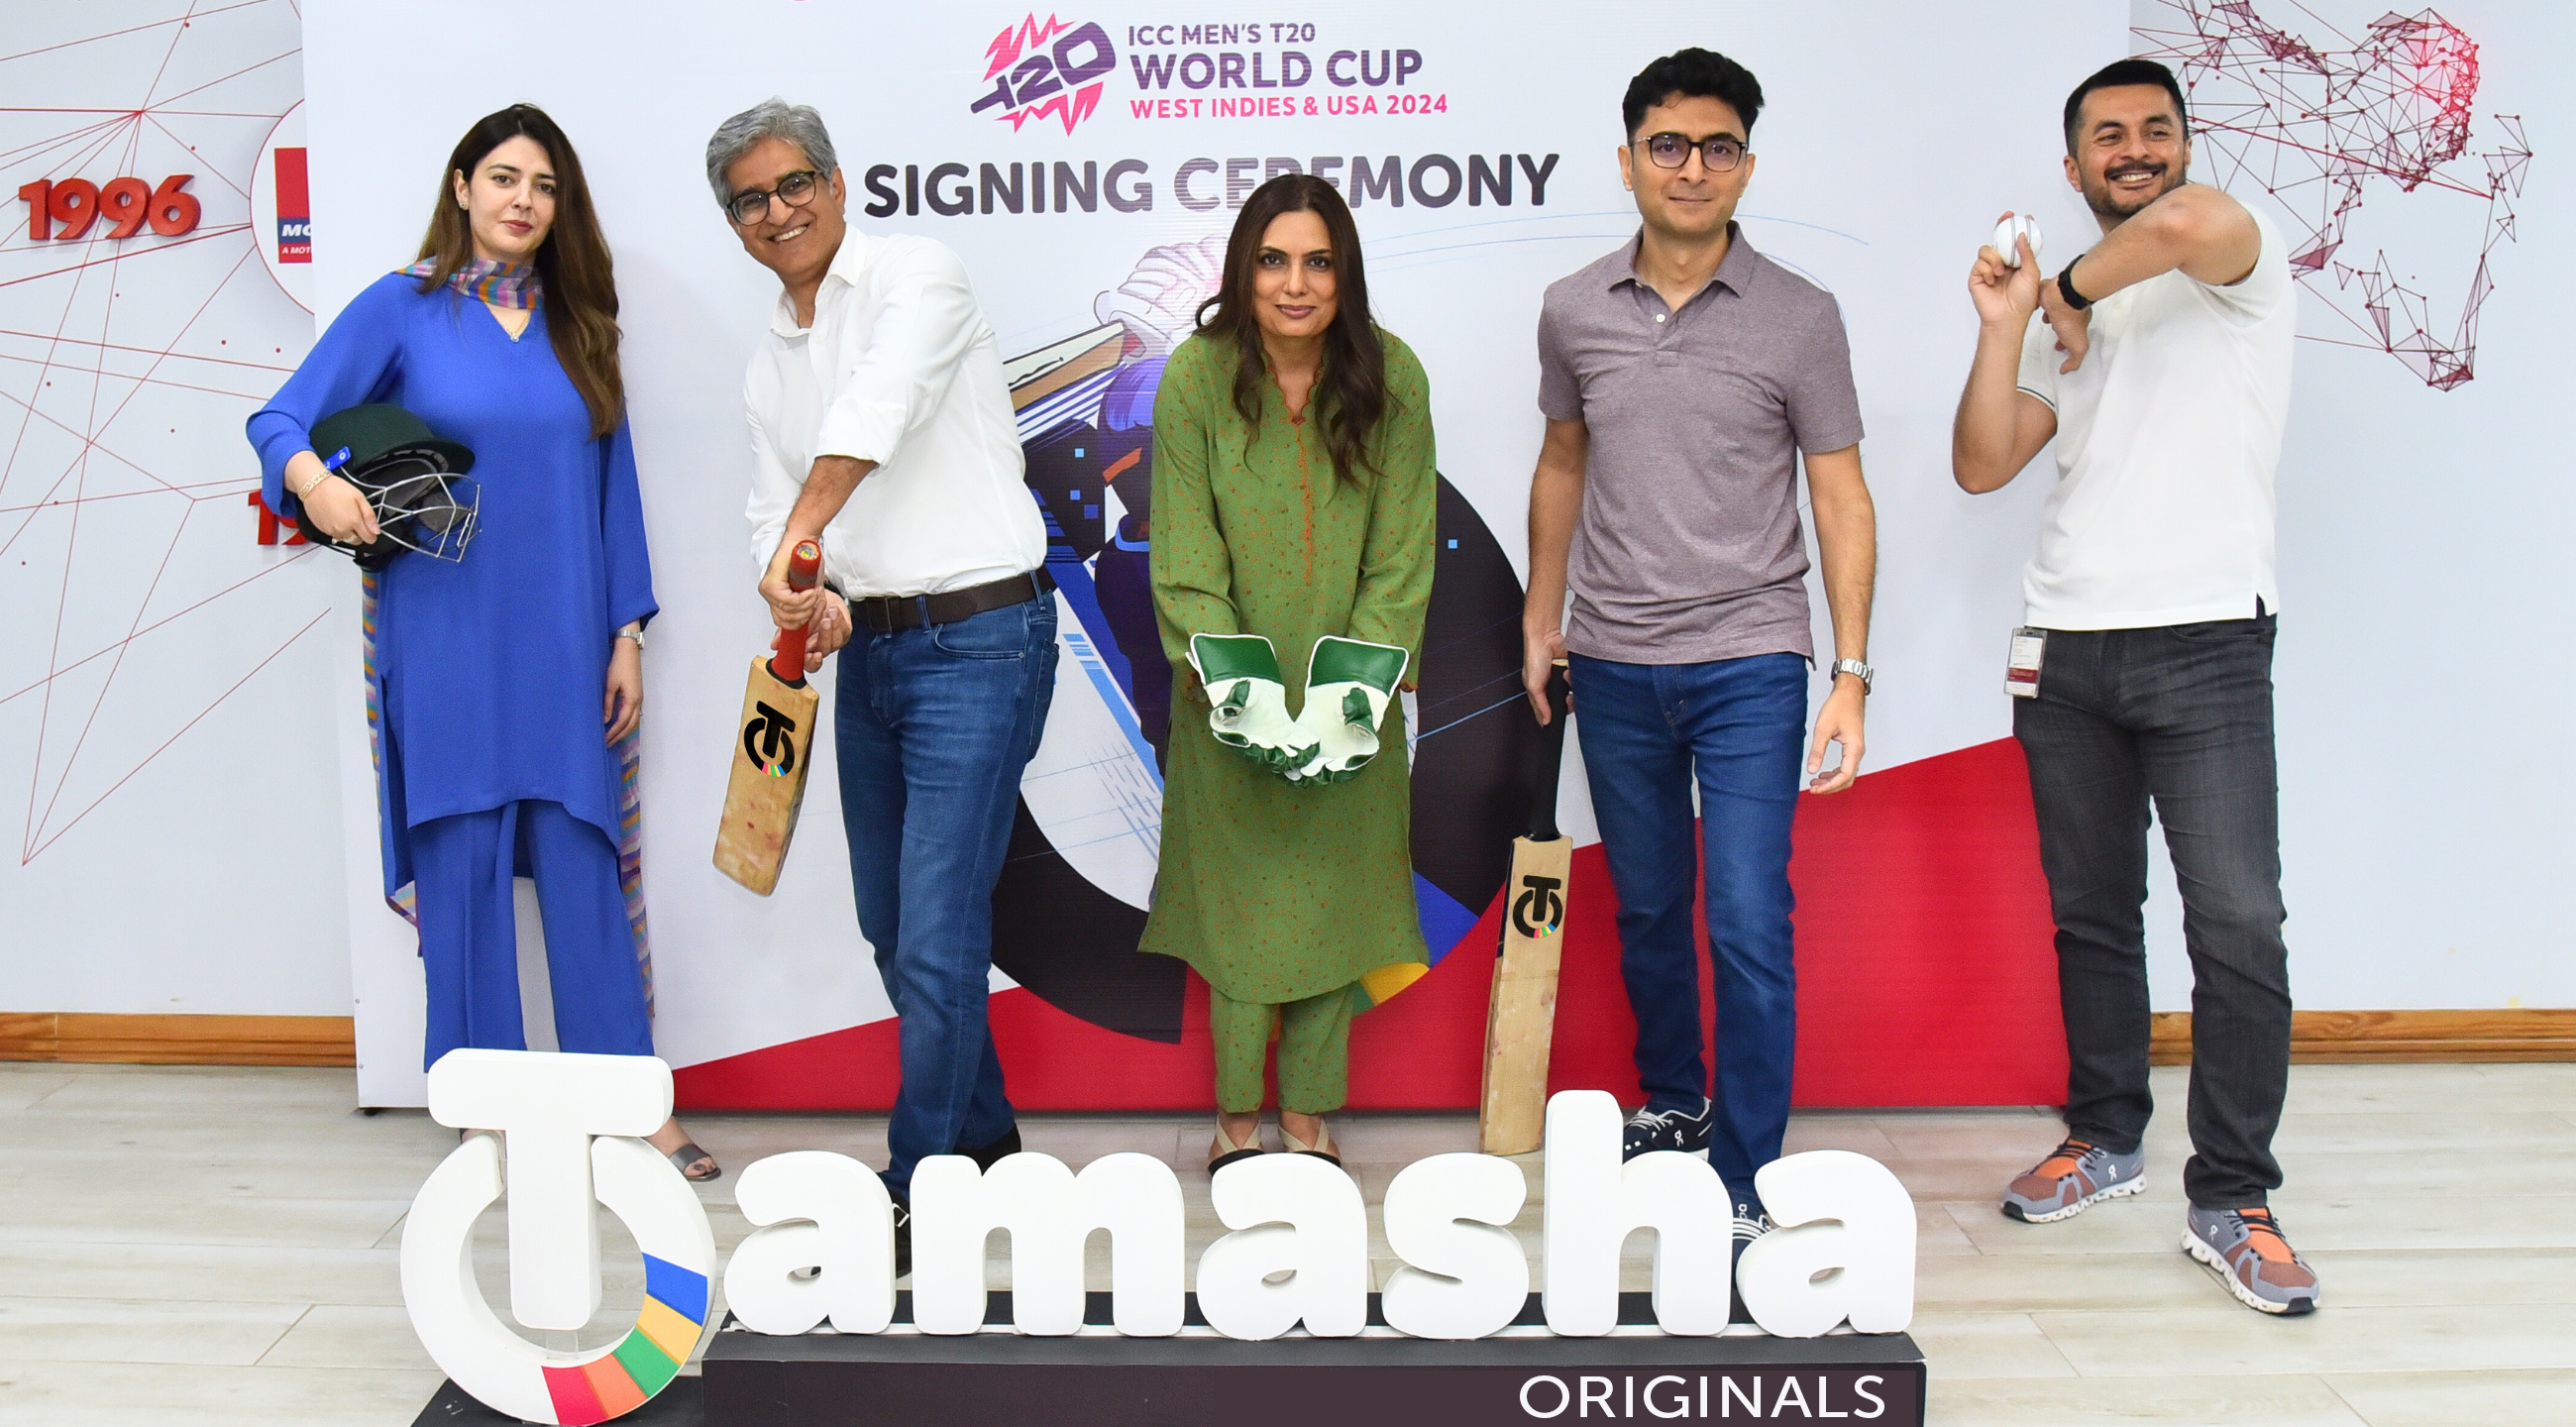 Tamasha's acquisition of streaming rights for all major ICC tournaments in 2024